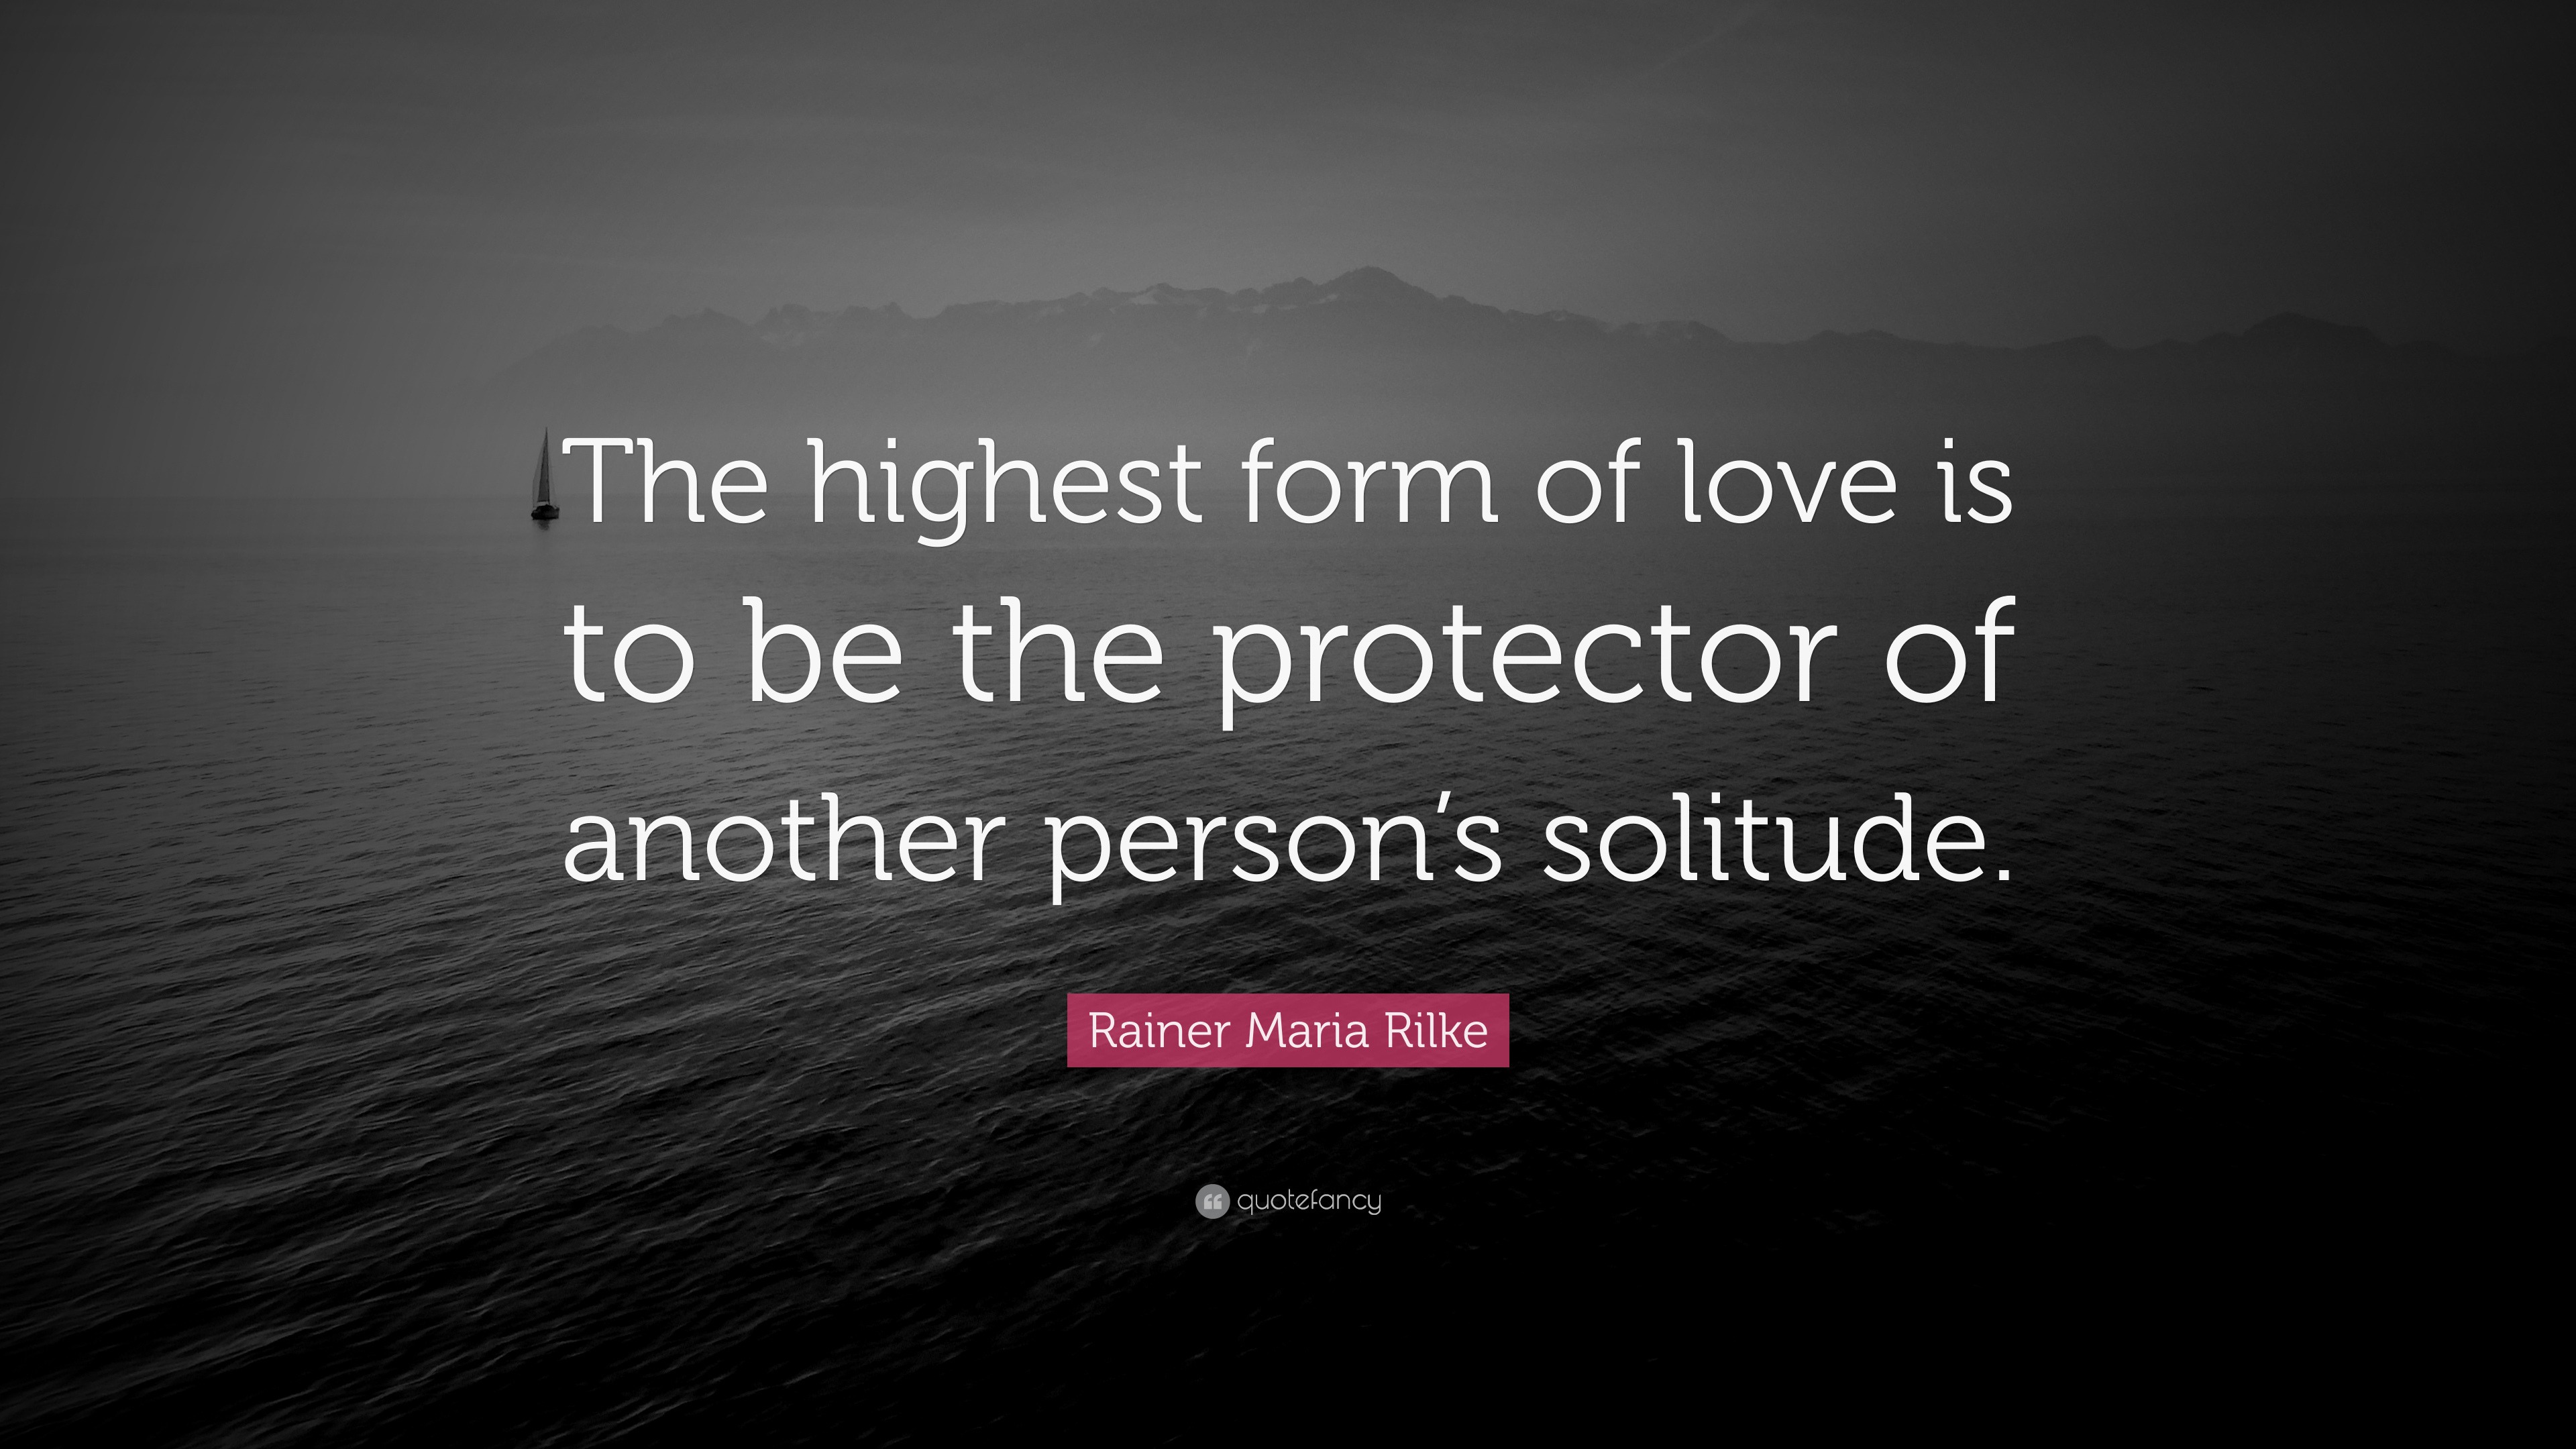 Rainer Maria Rilke Quote: “The highest form of love is to be the ...